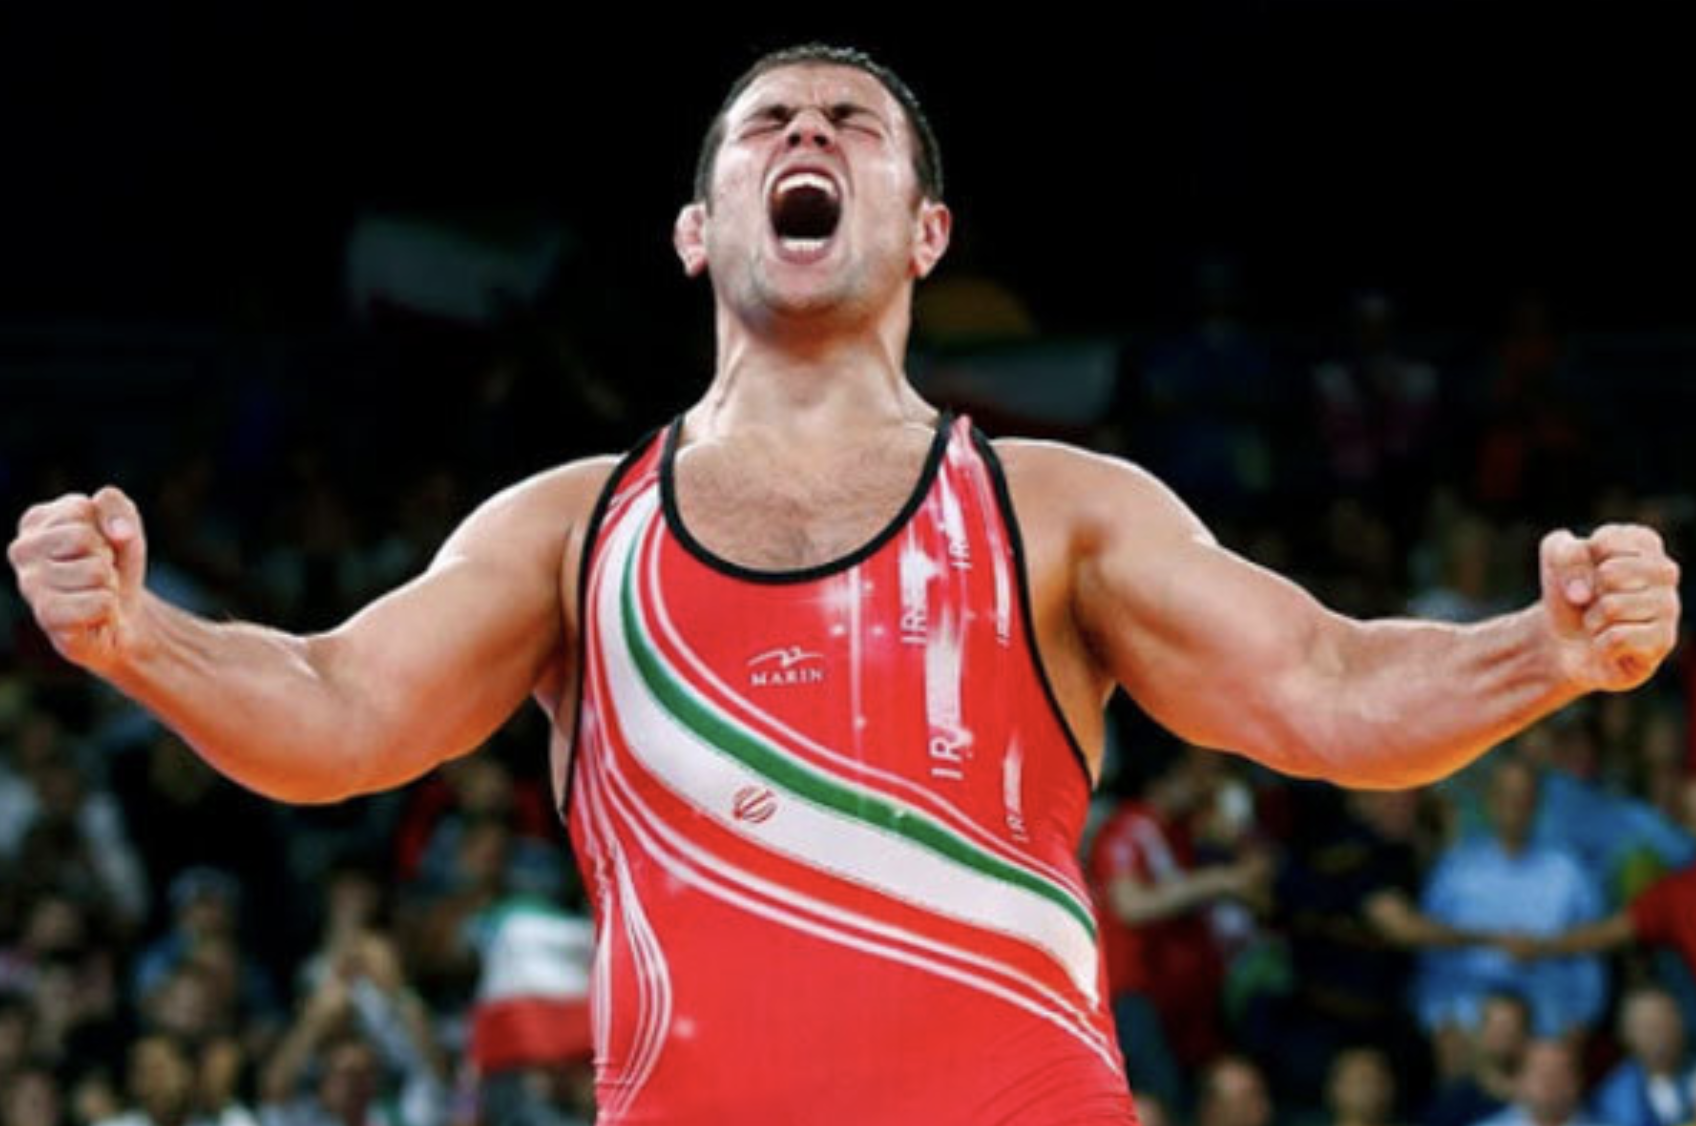 Iranian wrestler Ghasemi receives Olympic gold after 10 years